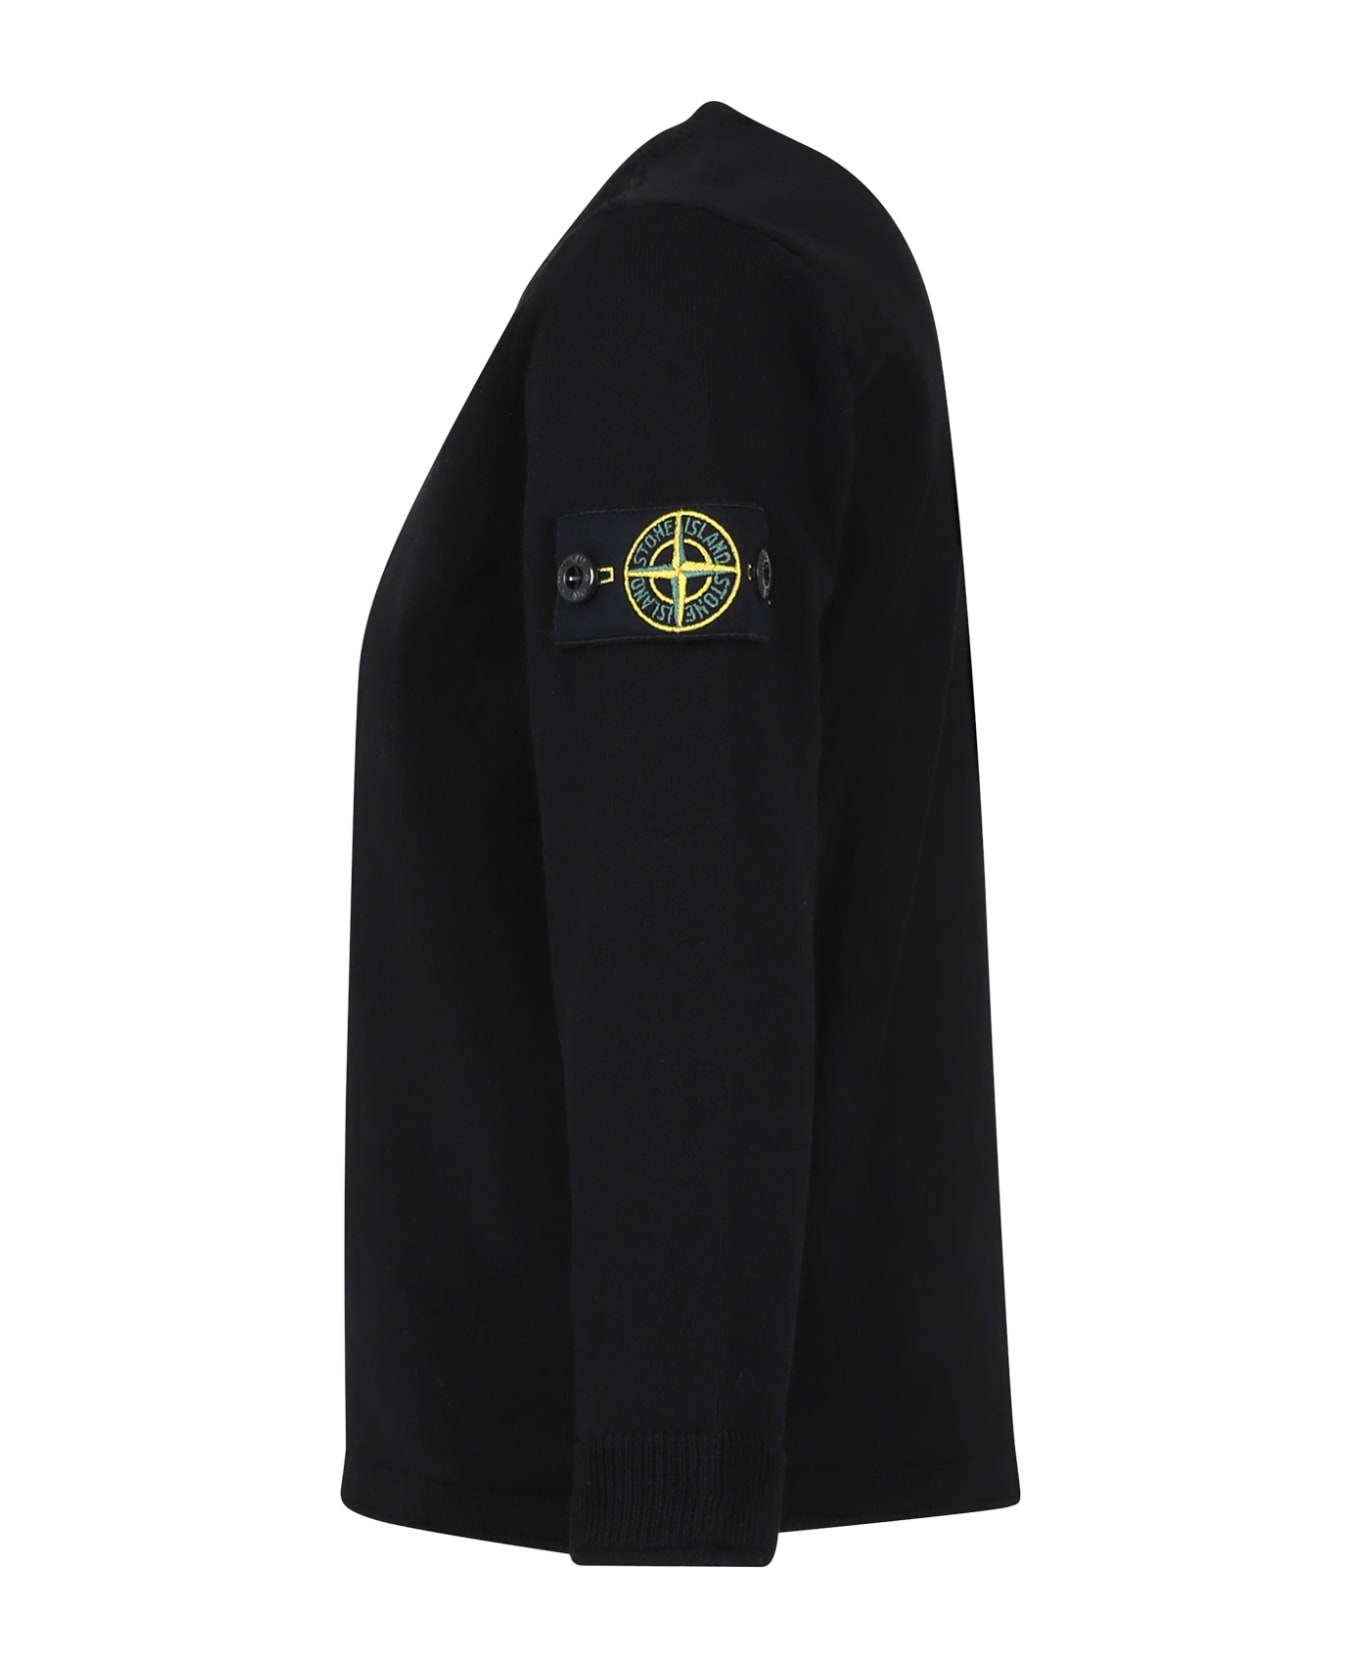 Stone Island Junior Black Sweater For Baby Boy With Compass - Black